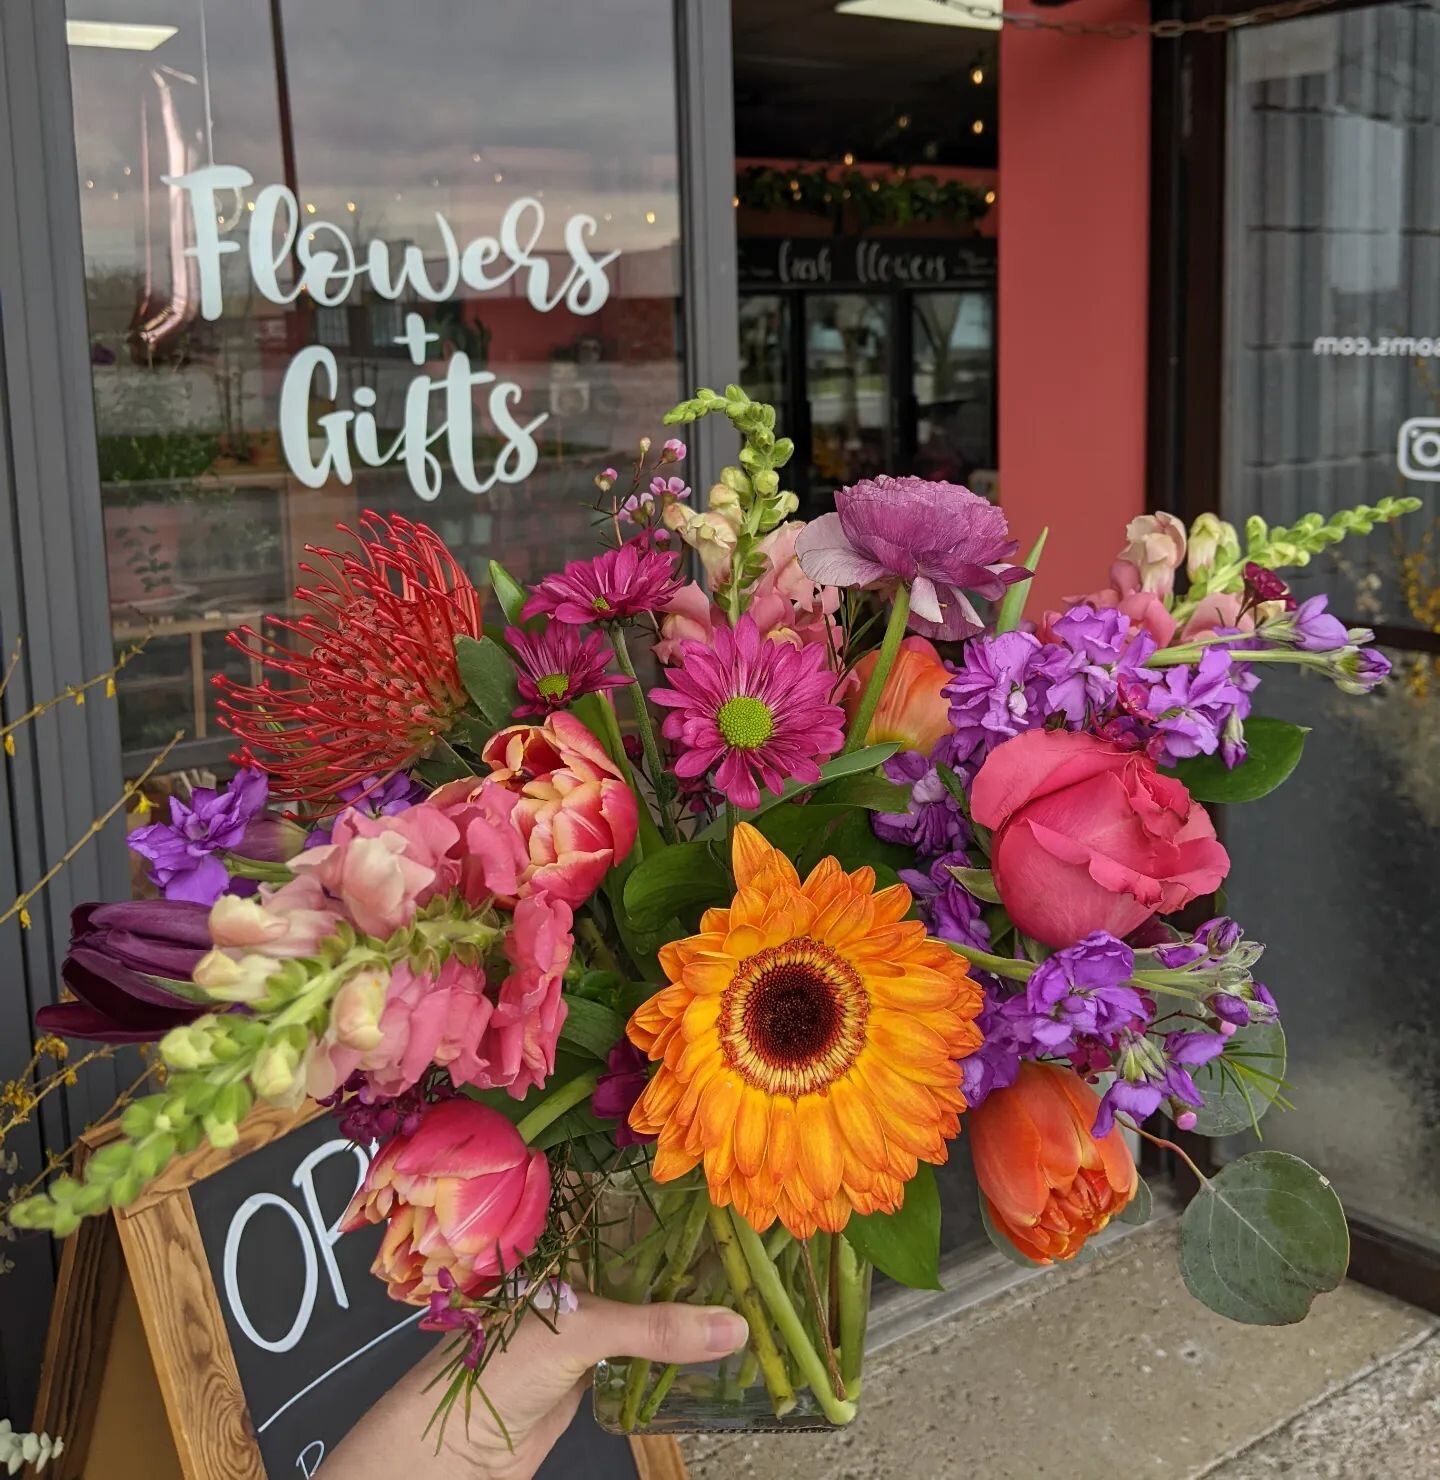 Happy April! New month, new flowers, new gift items, some adjusted store hours(see below), and a busy Spring season of holidays/recitals/showers/weddings/graduations begins. Mothers Day is just a few weeks away and we're ready for you.

Watch for adj